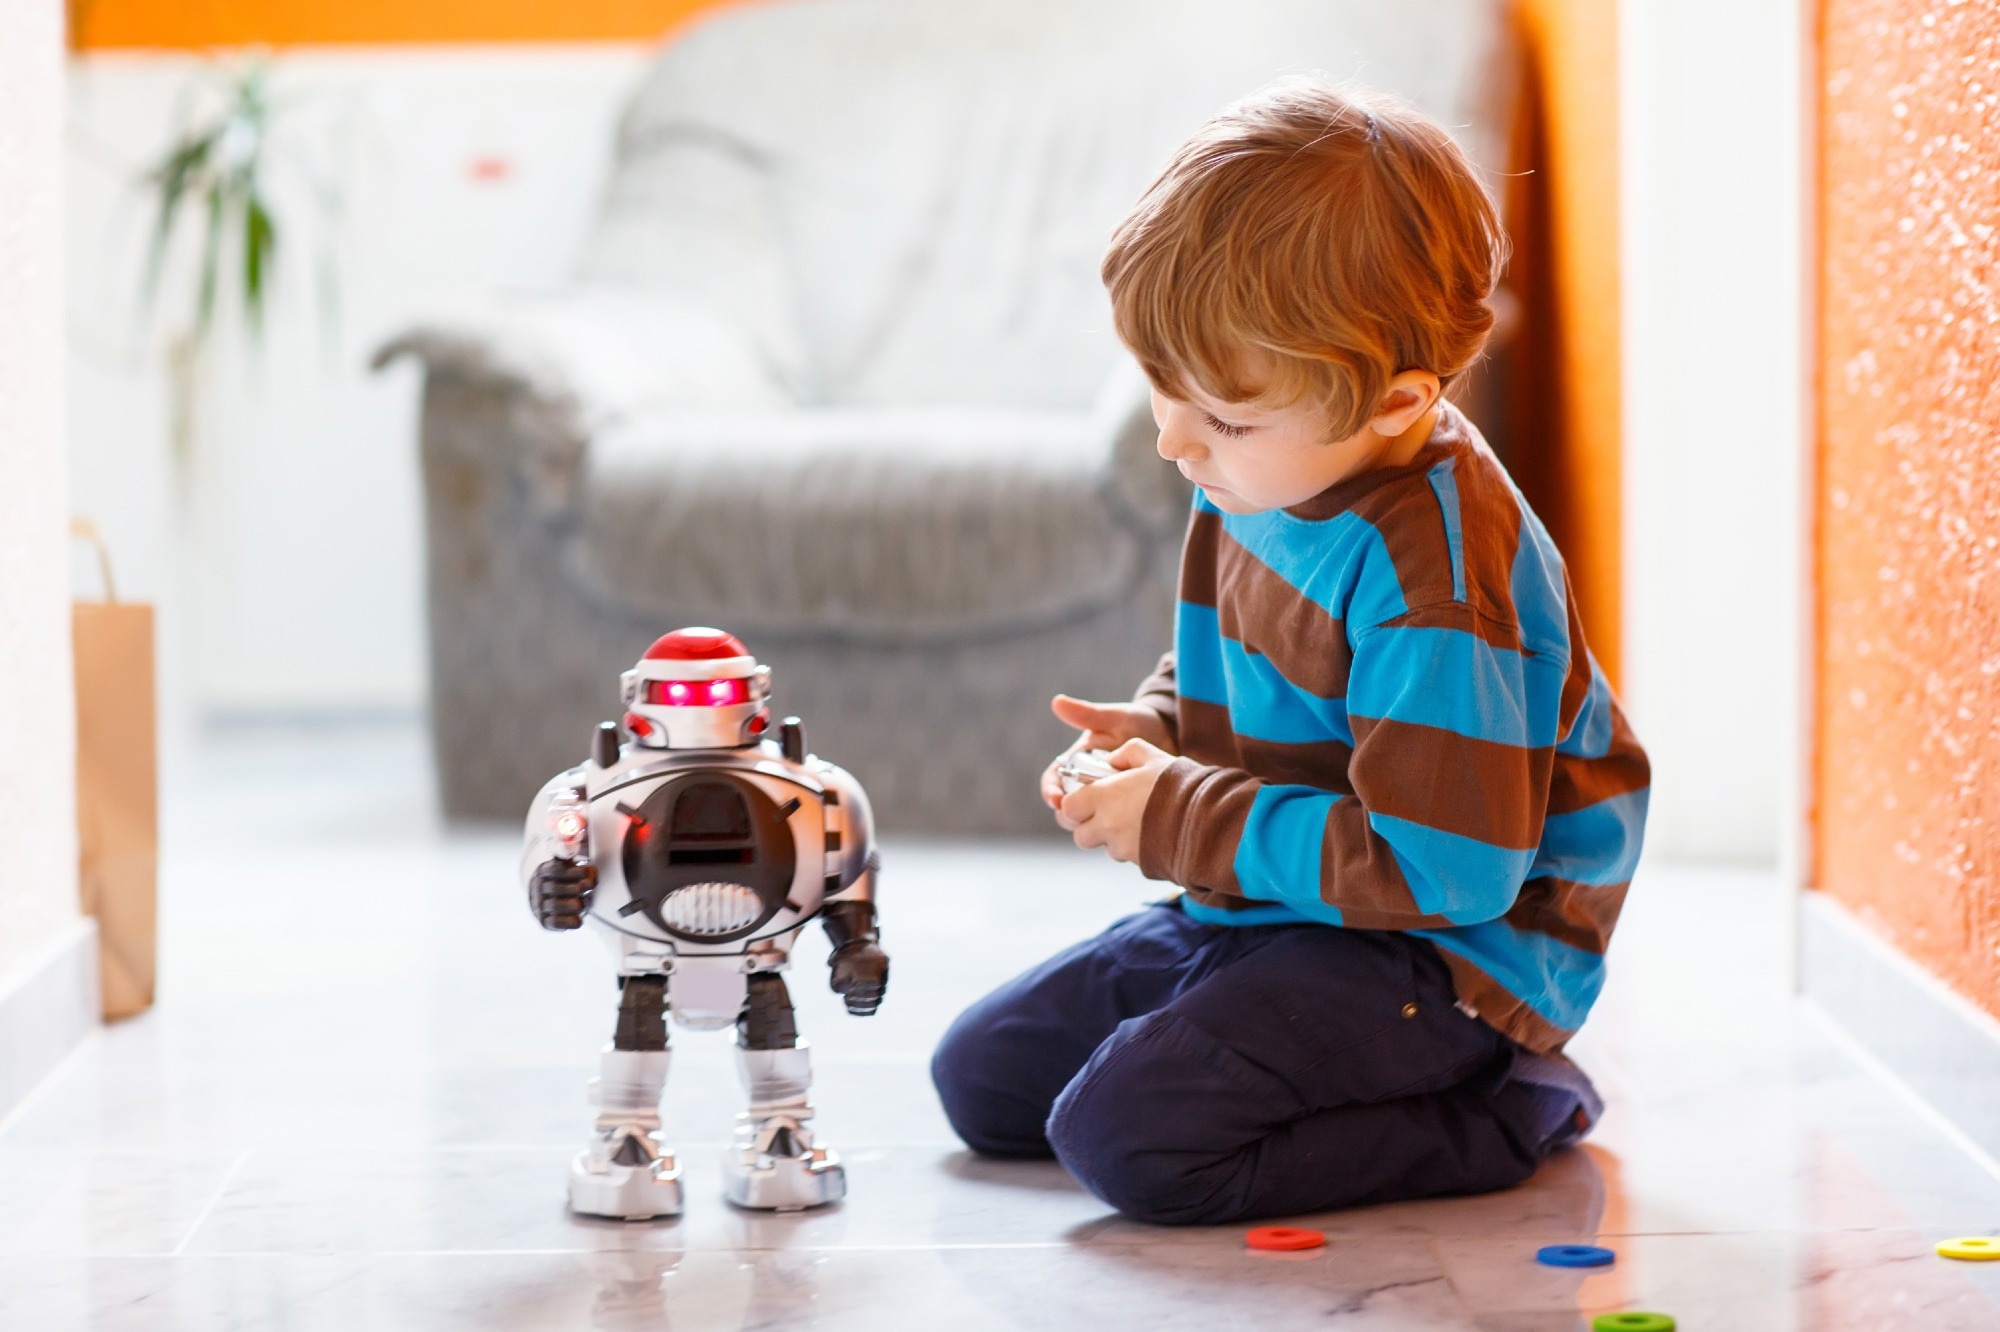 Study: People with Autism Spectrum Disorder Could Interact More Easily with a Robot than with a Human: Reasons and Limits. Image Credit: Irina Wilhauk/Shutterstock.com